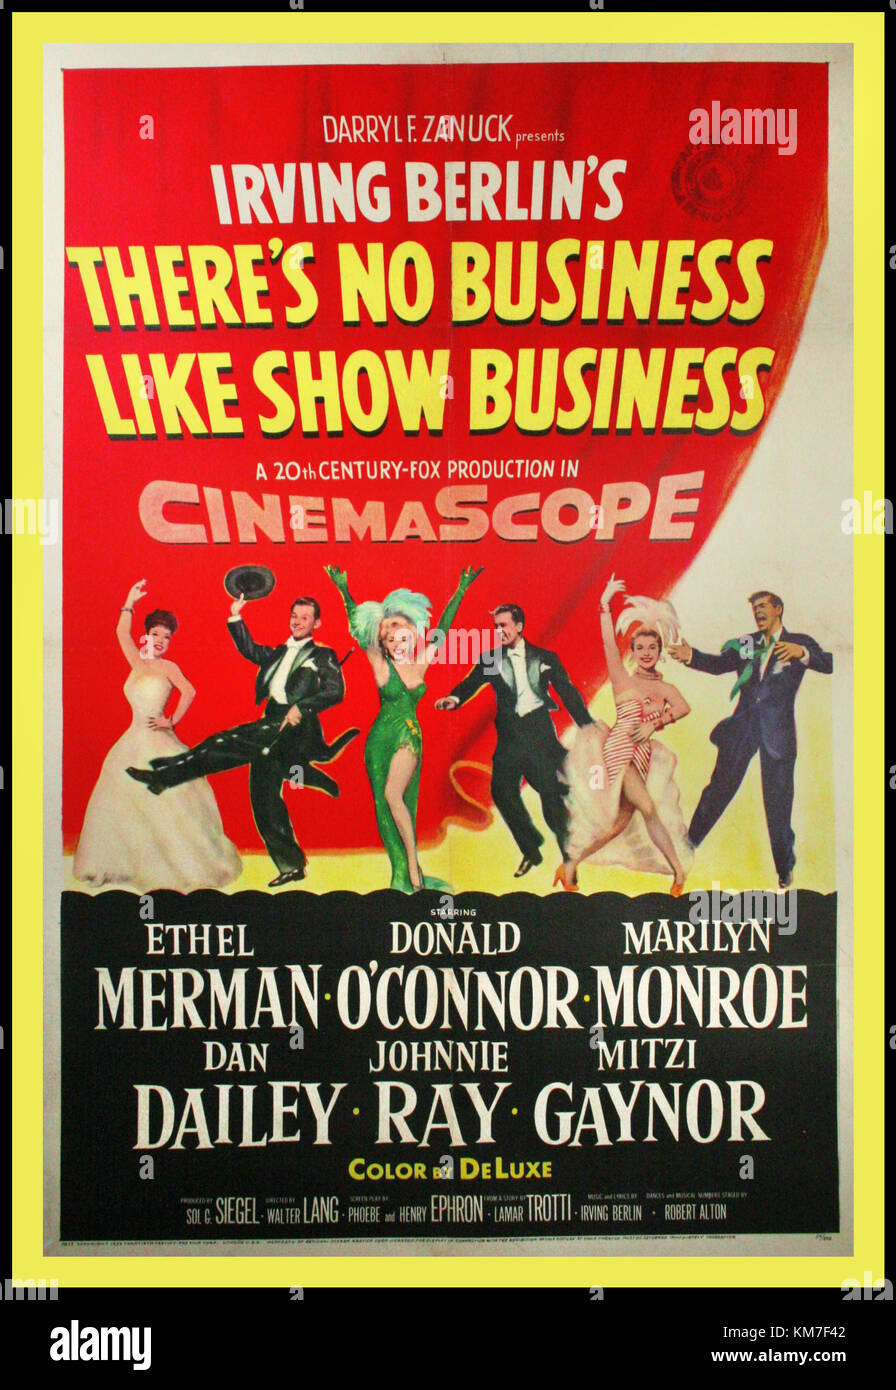 Vintage Musical Movie Film Poster THERE’S NO BUSINESS LIKE SHOW BUSINESS, 1954. Mit Ether Merman, Marilyn Monroe, Donald O’Connor, Johnnie Ray, Dan Dailey, Mitzi Gaynor, Regisseur Walter lang. Irving Berlin Musical Vintage Entertainment Poster Stockfoto